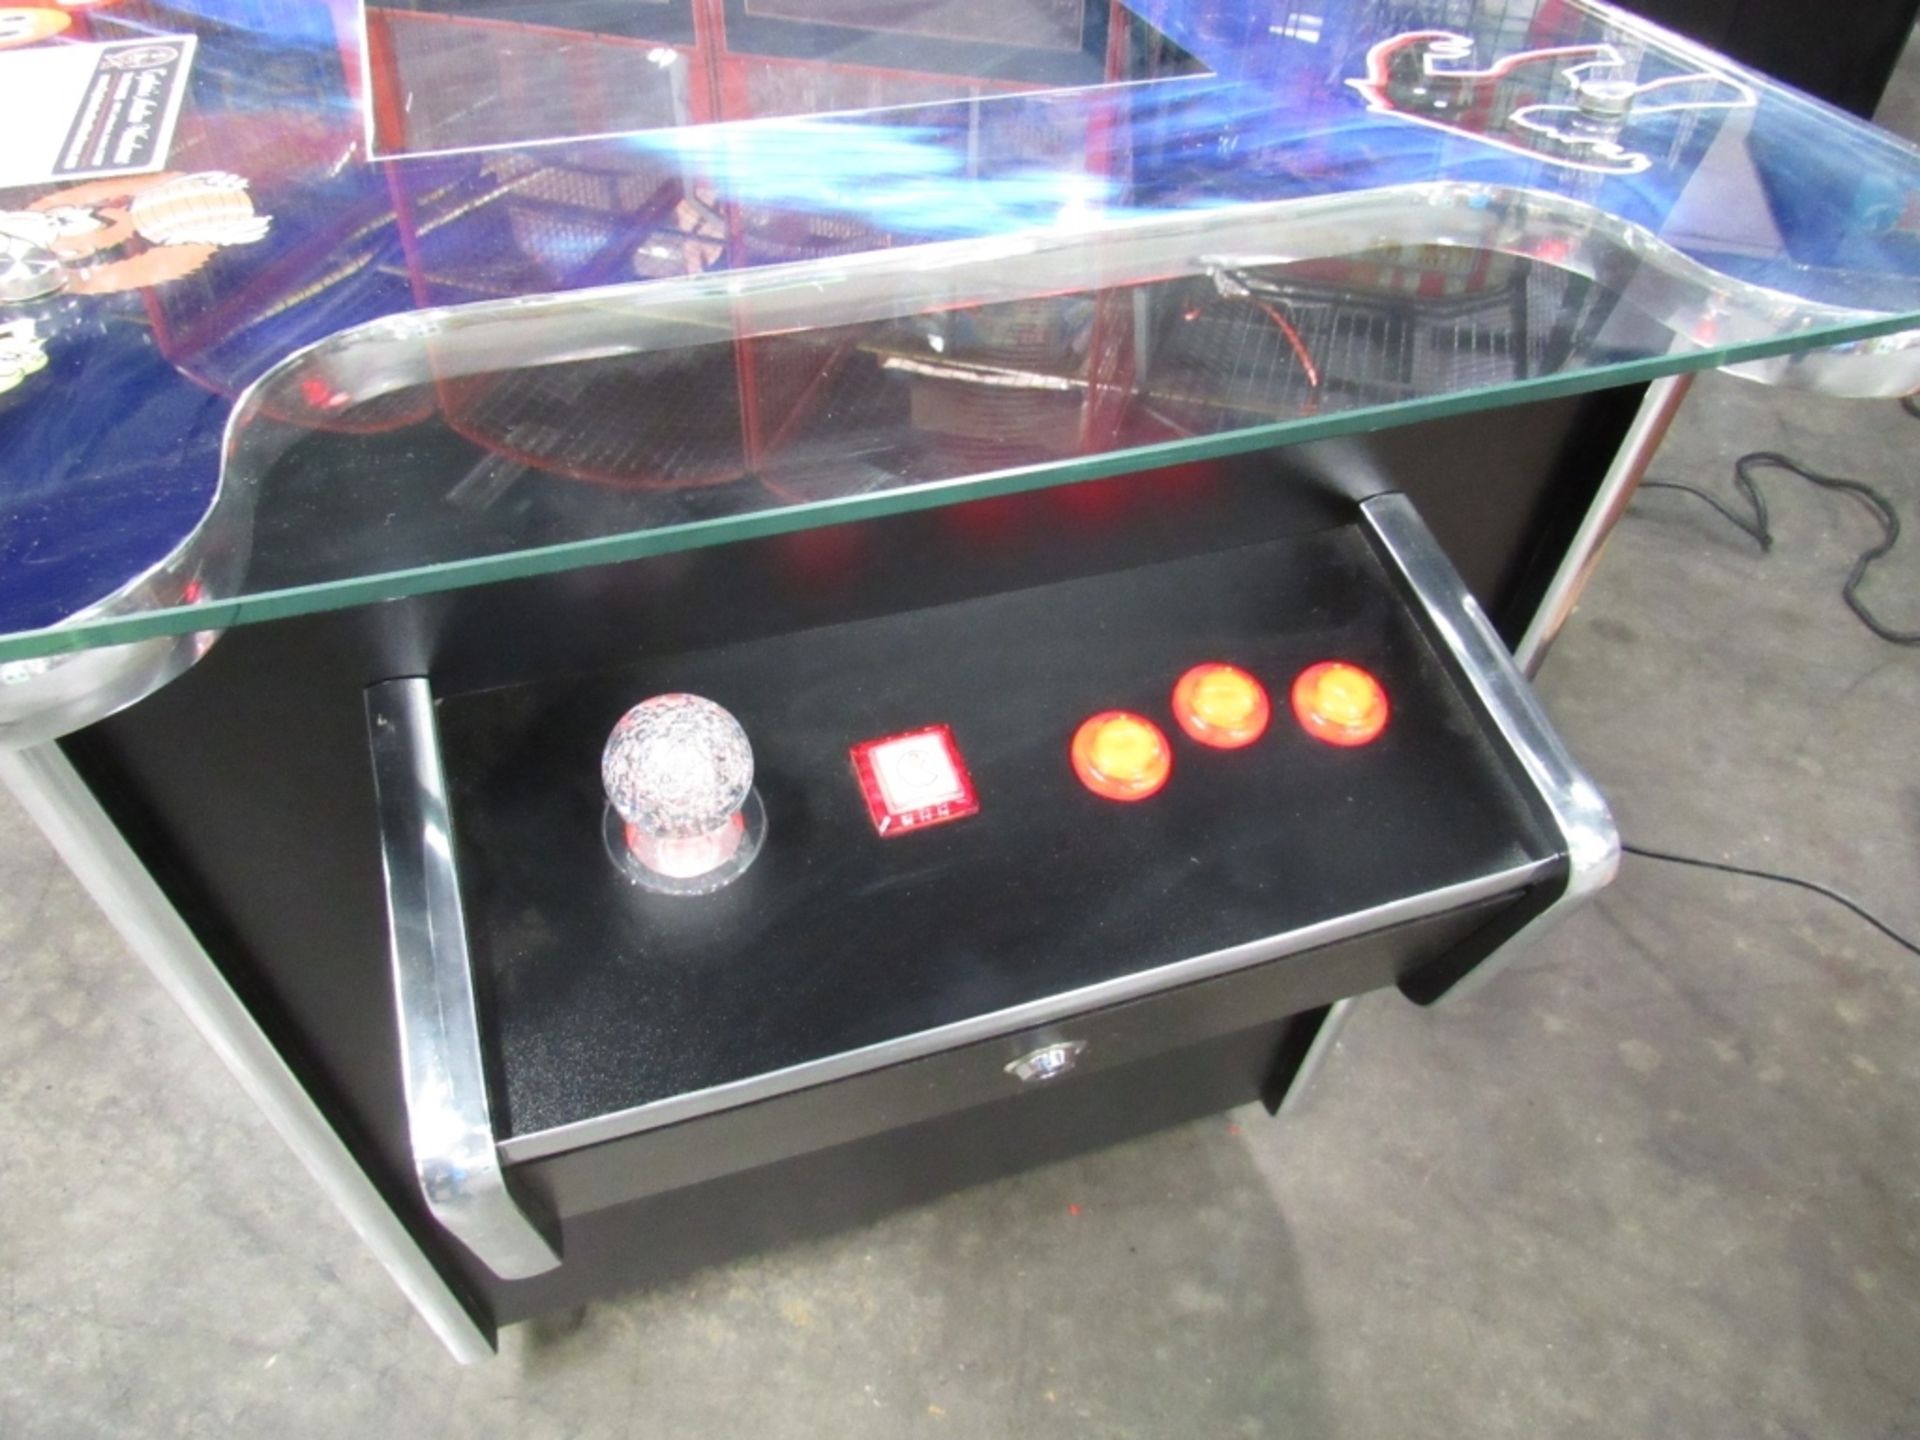 60 IN 1 NEW MULTICADE COCKTAIL TABLE ARCADE GAME - Image 2 of 6